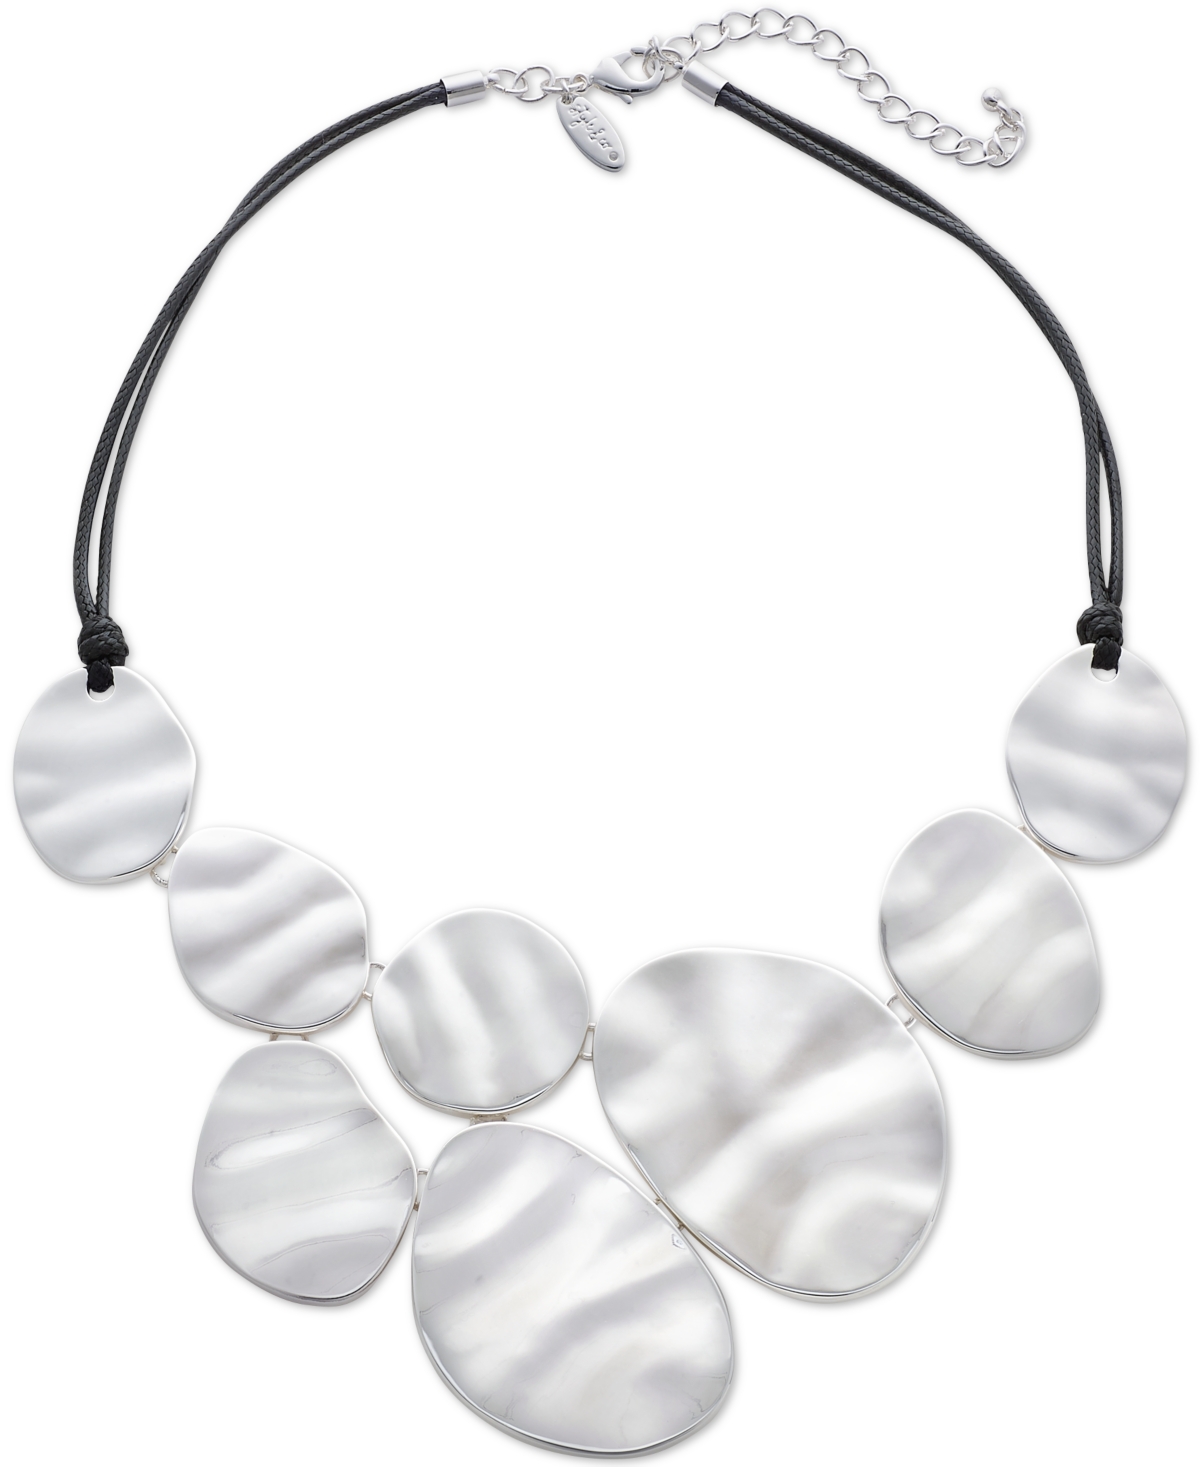 Silver-Tone Frontal Necklace, 19-1/4" + 3" extender, Created for Macy's - Gold